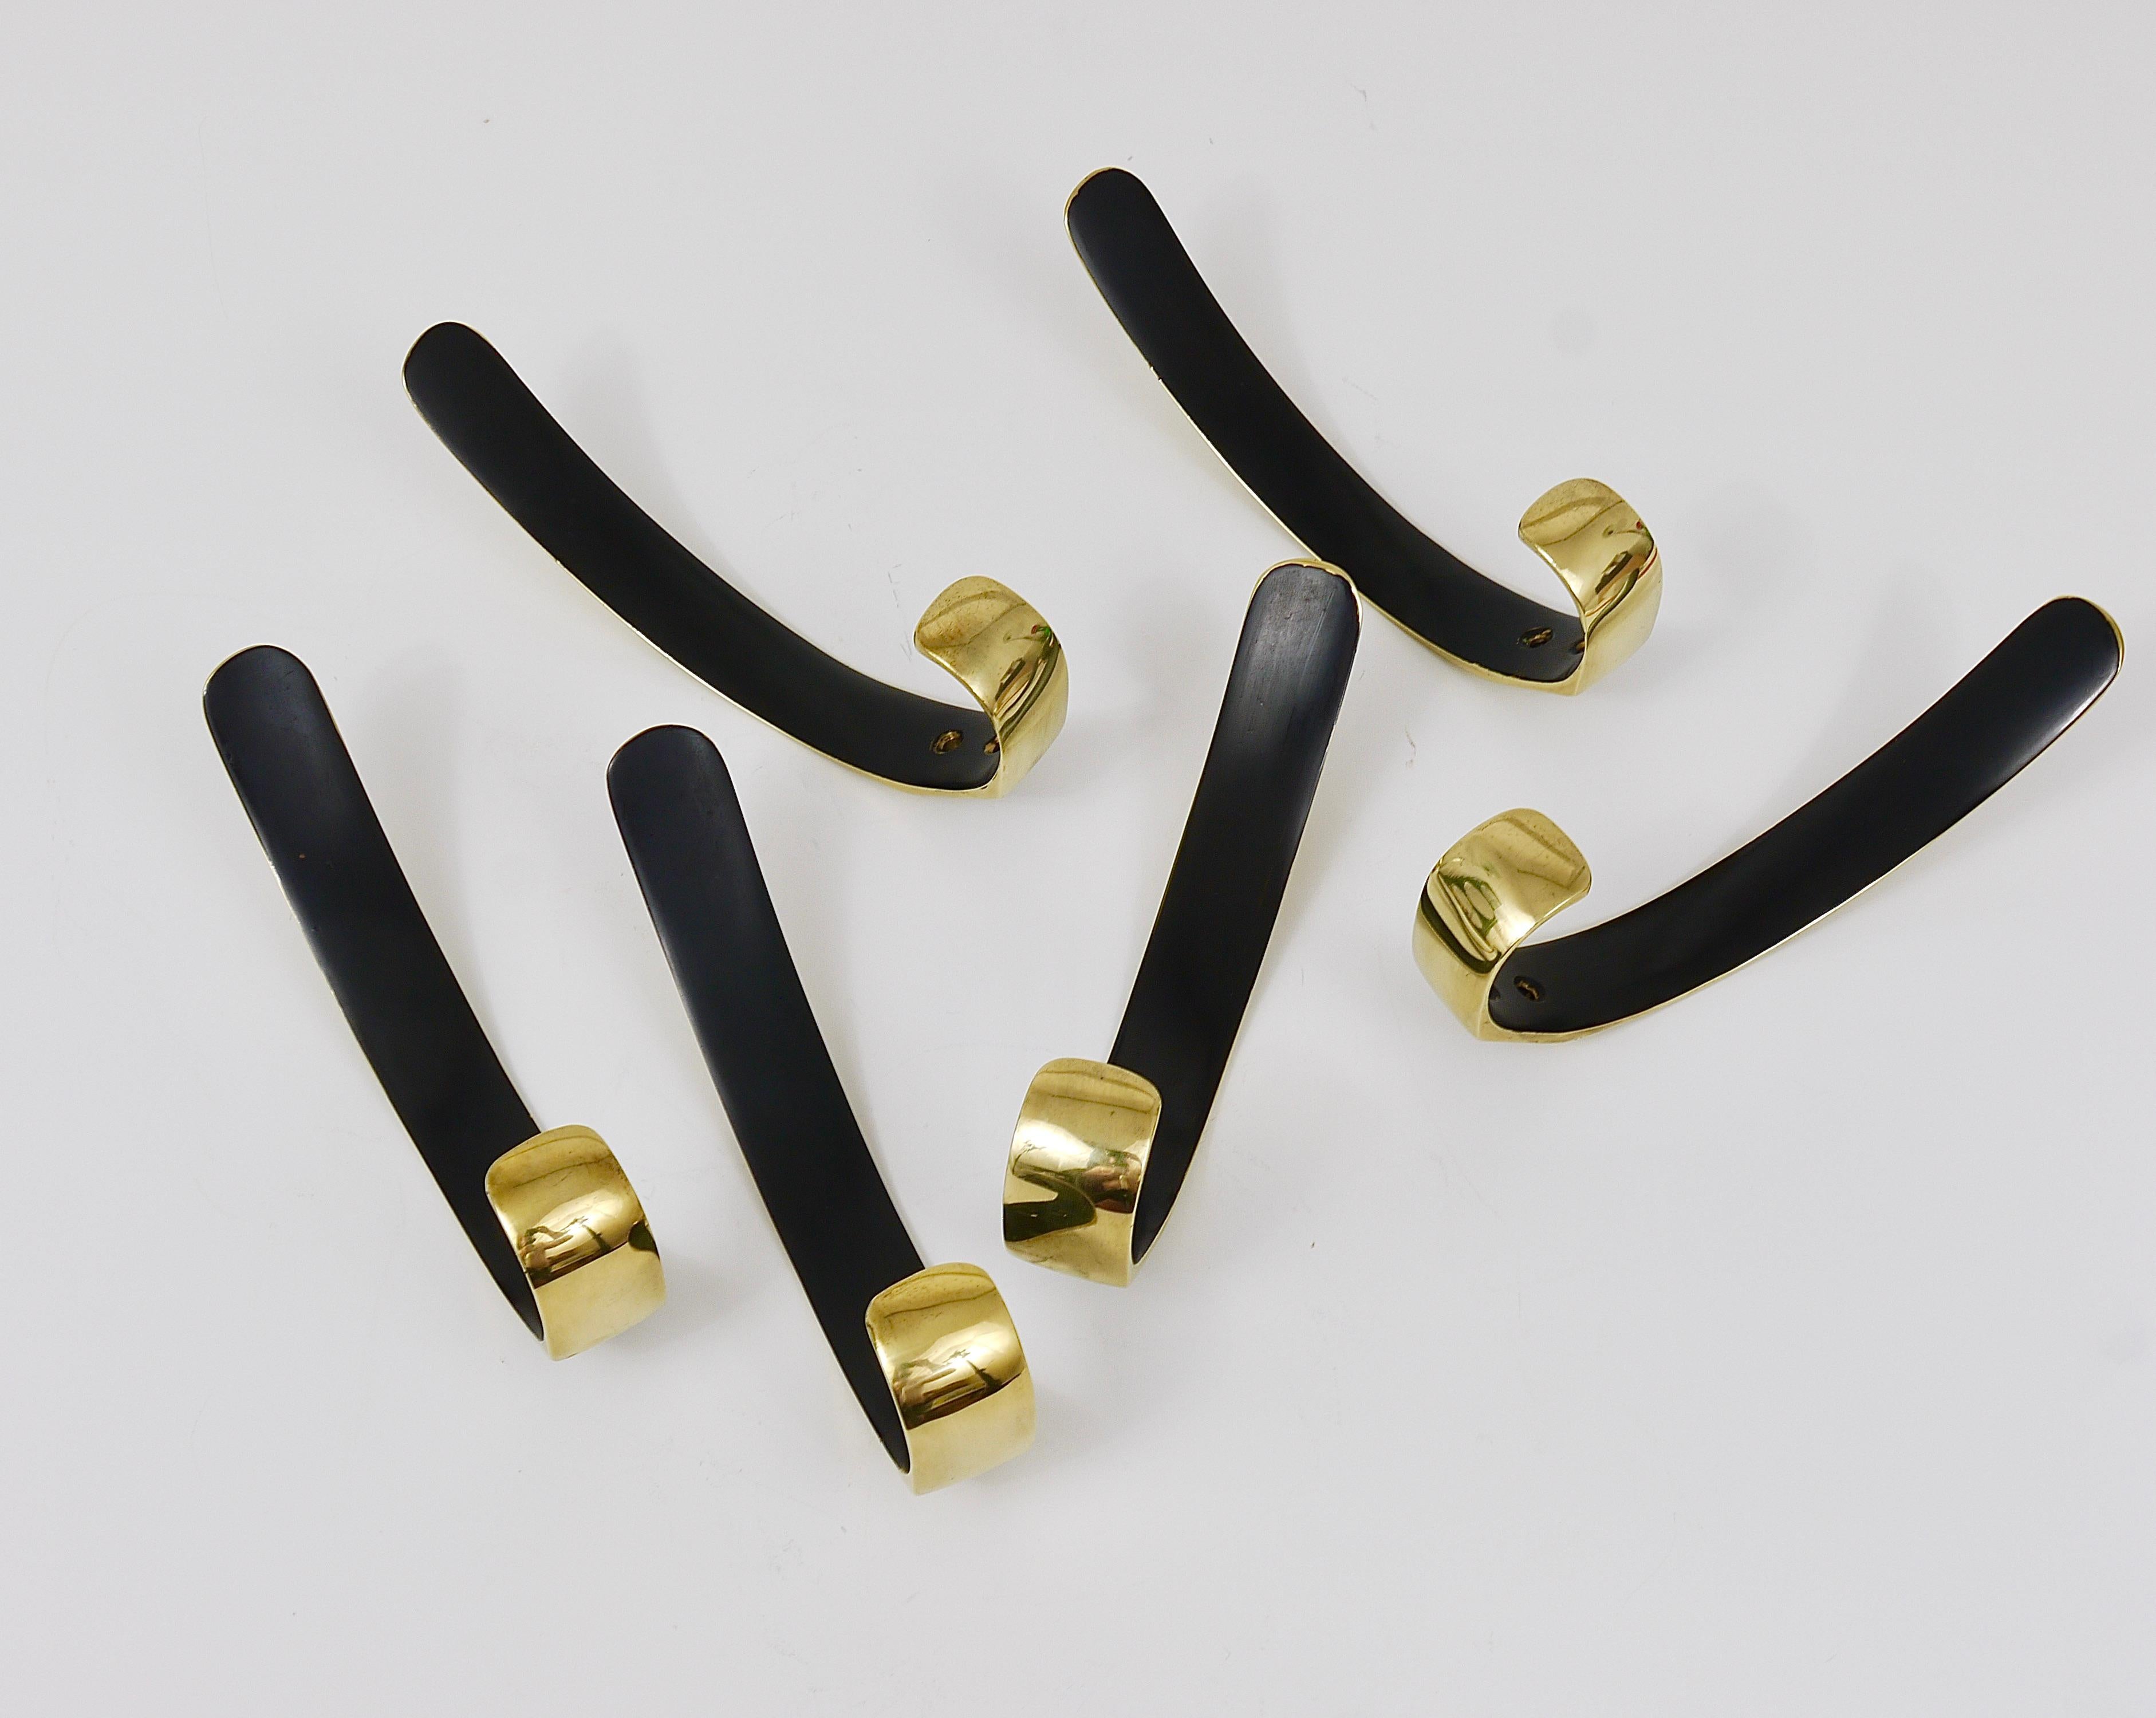 Up to six beautiful and elegant modernist brass wall hooks in the style of Carl Aubock. Executed in the 1950s by Hertha Baller, Austria. Solid brass, partly polished and partly black patinated. In very good condition with marginal patina. Six hooks